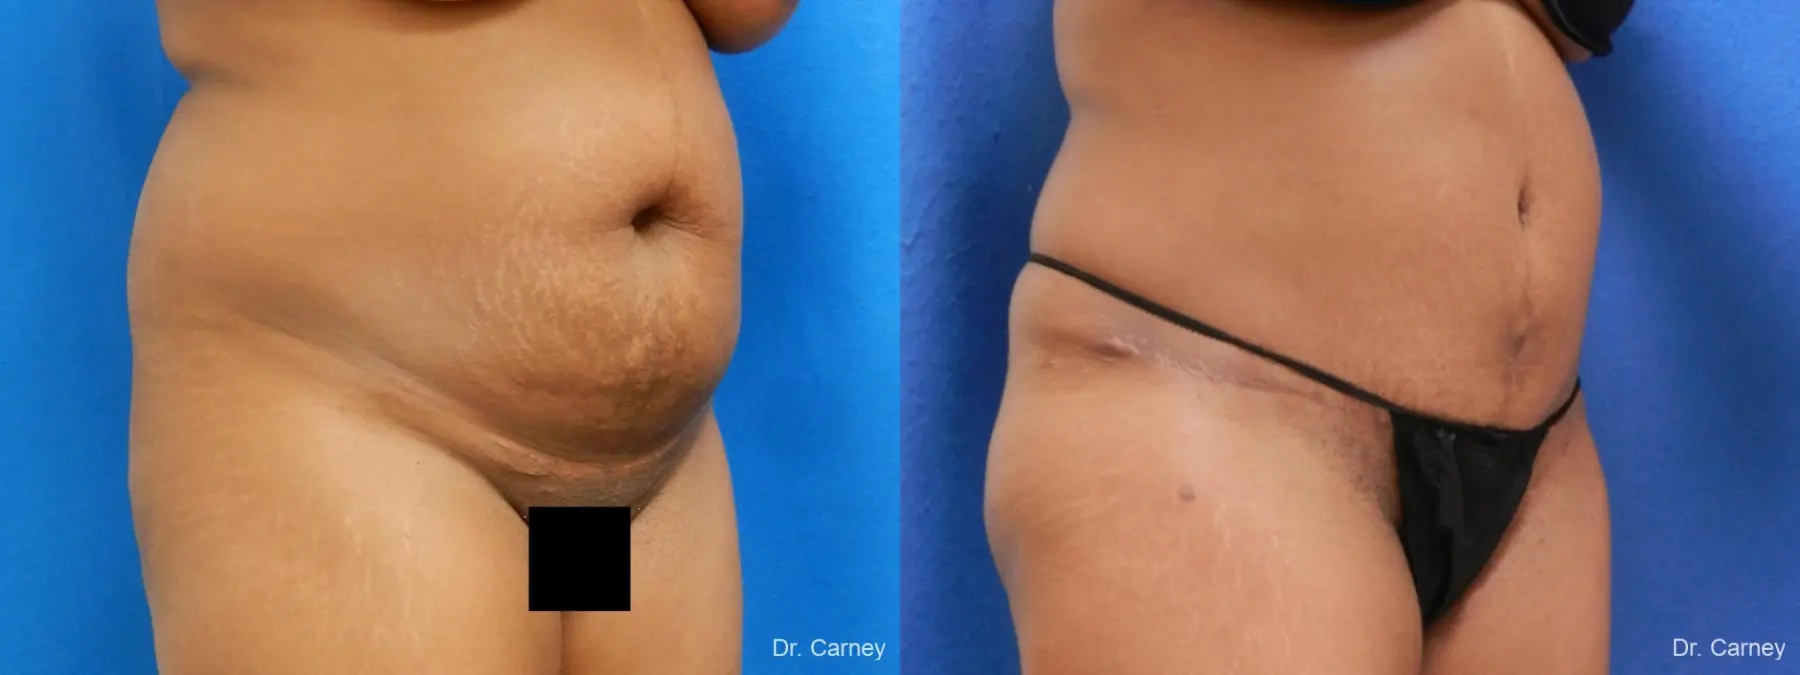 Abdominoplasty: Patient 5 - Before and After 2